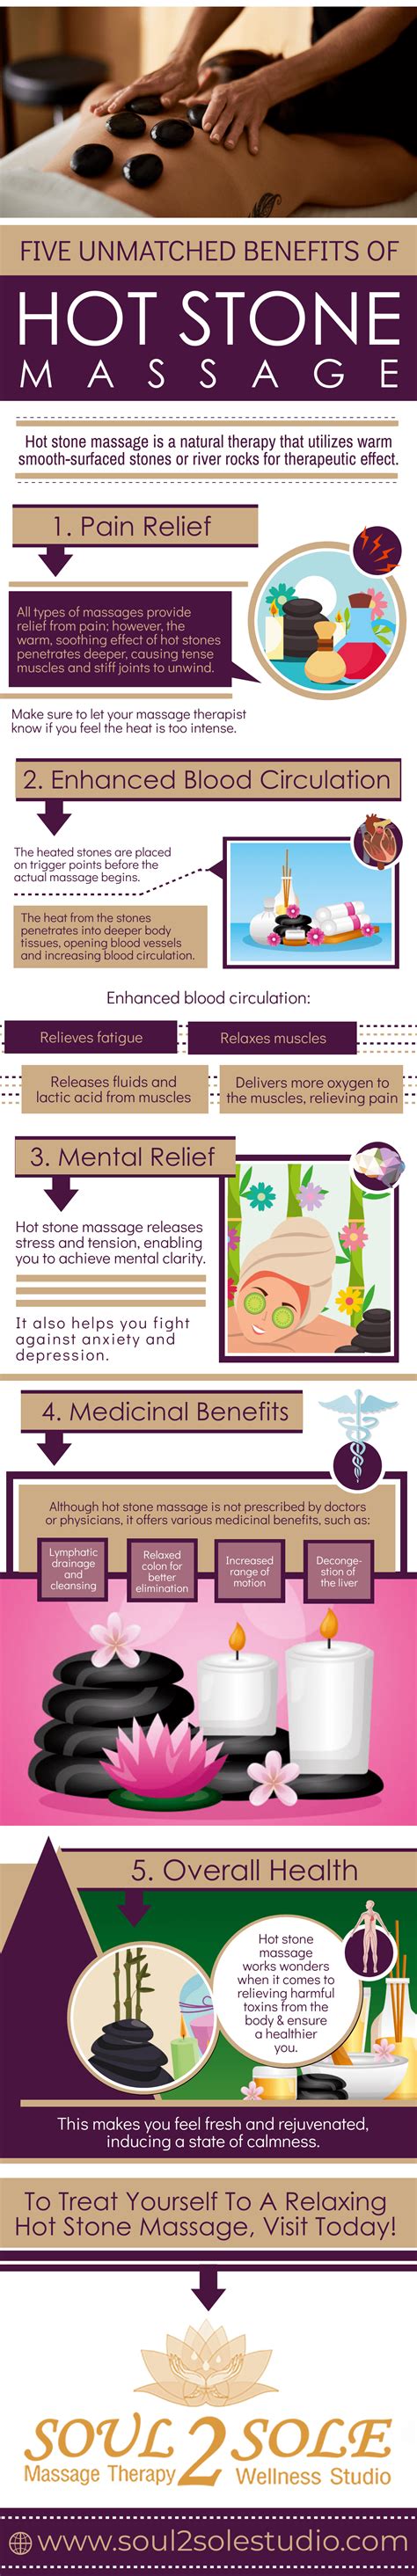 Five Unmatched Benefits Of Hot Stone Massage Infographic Soul 2